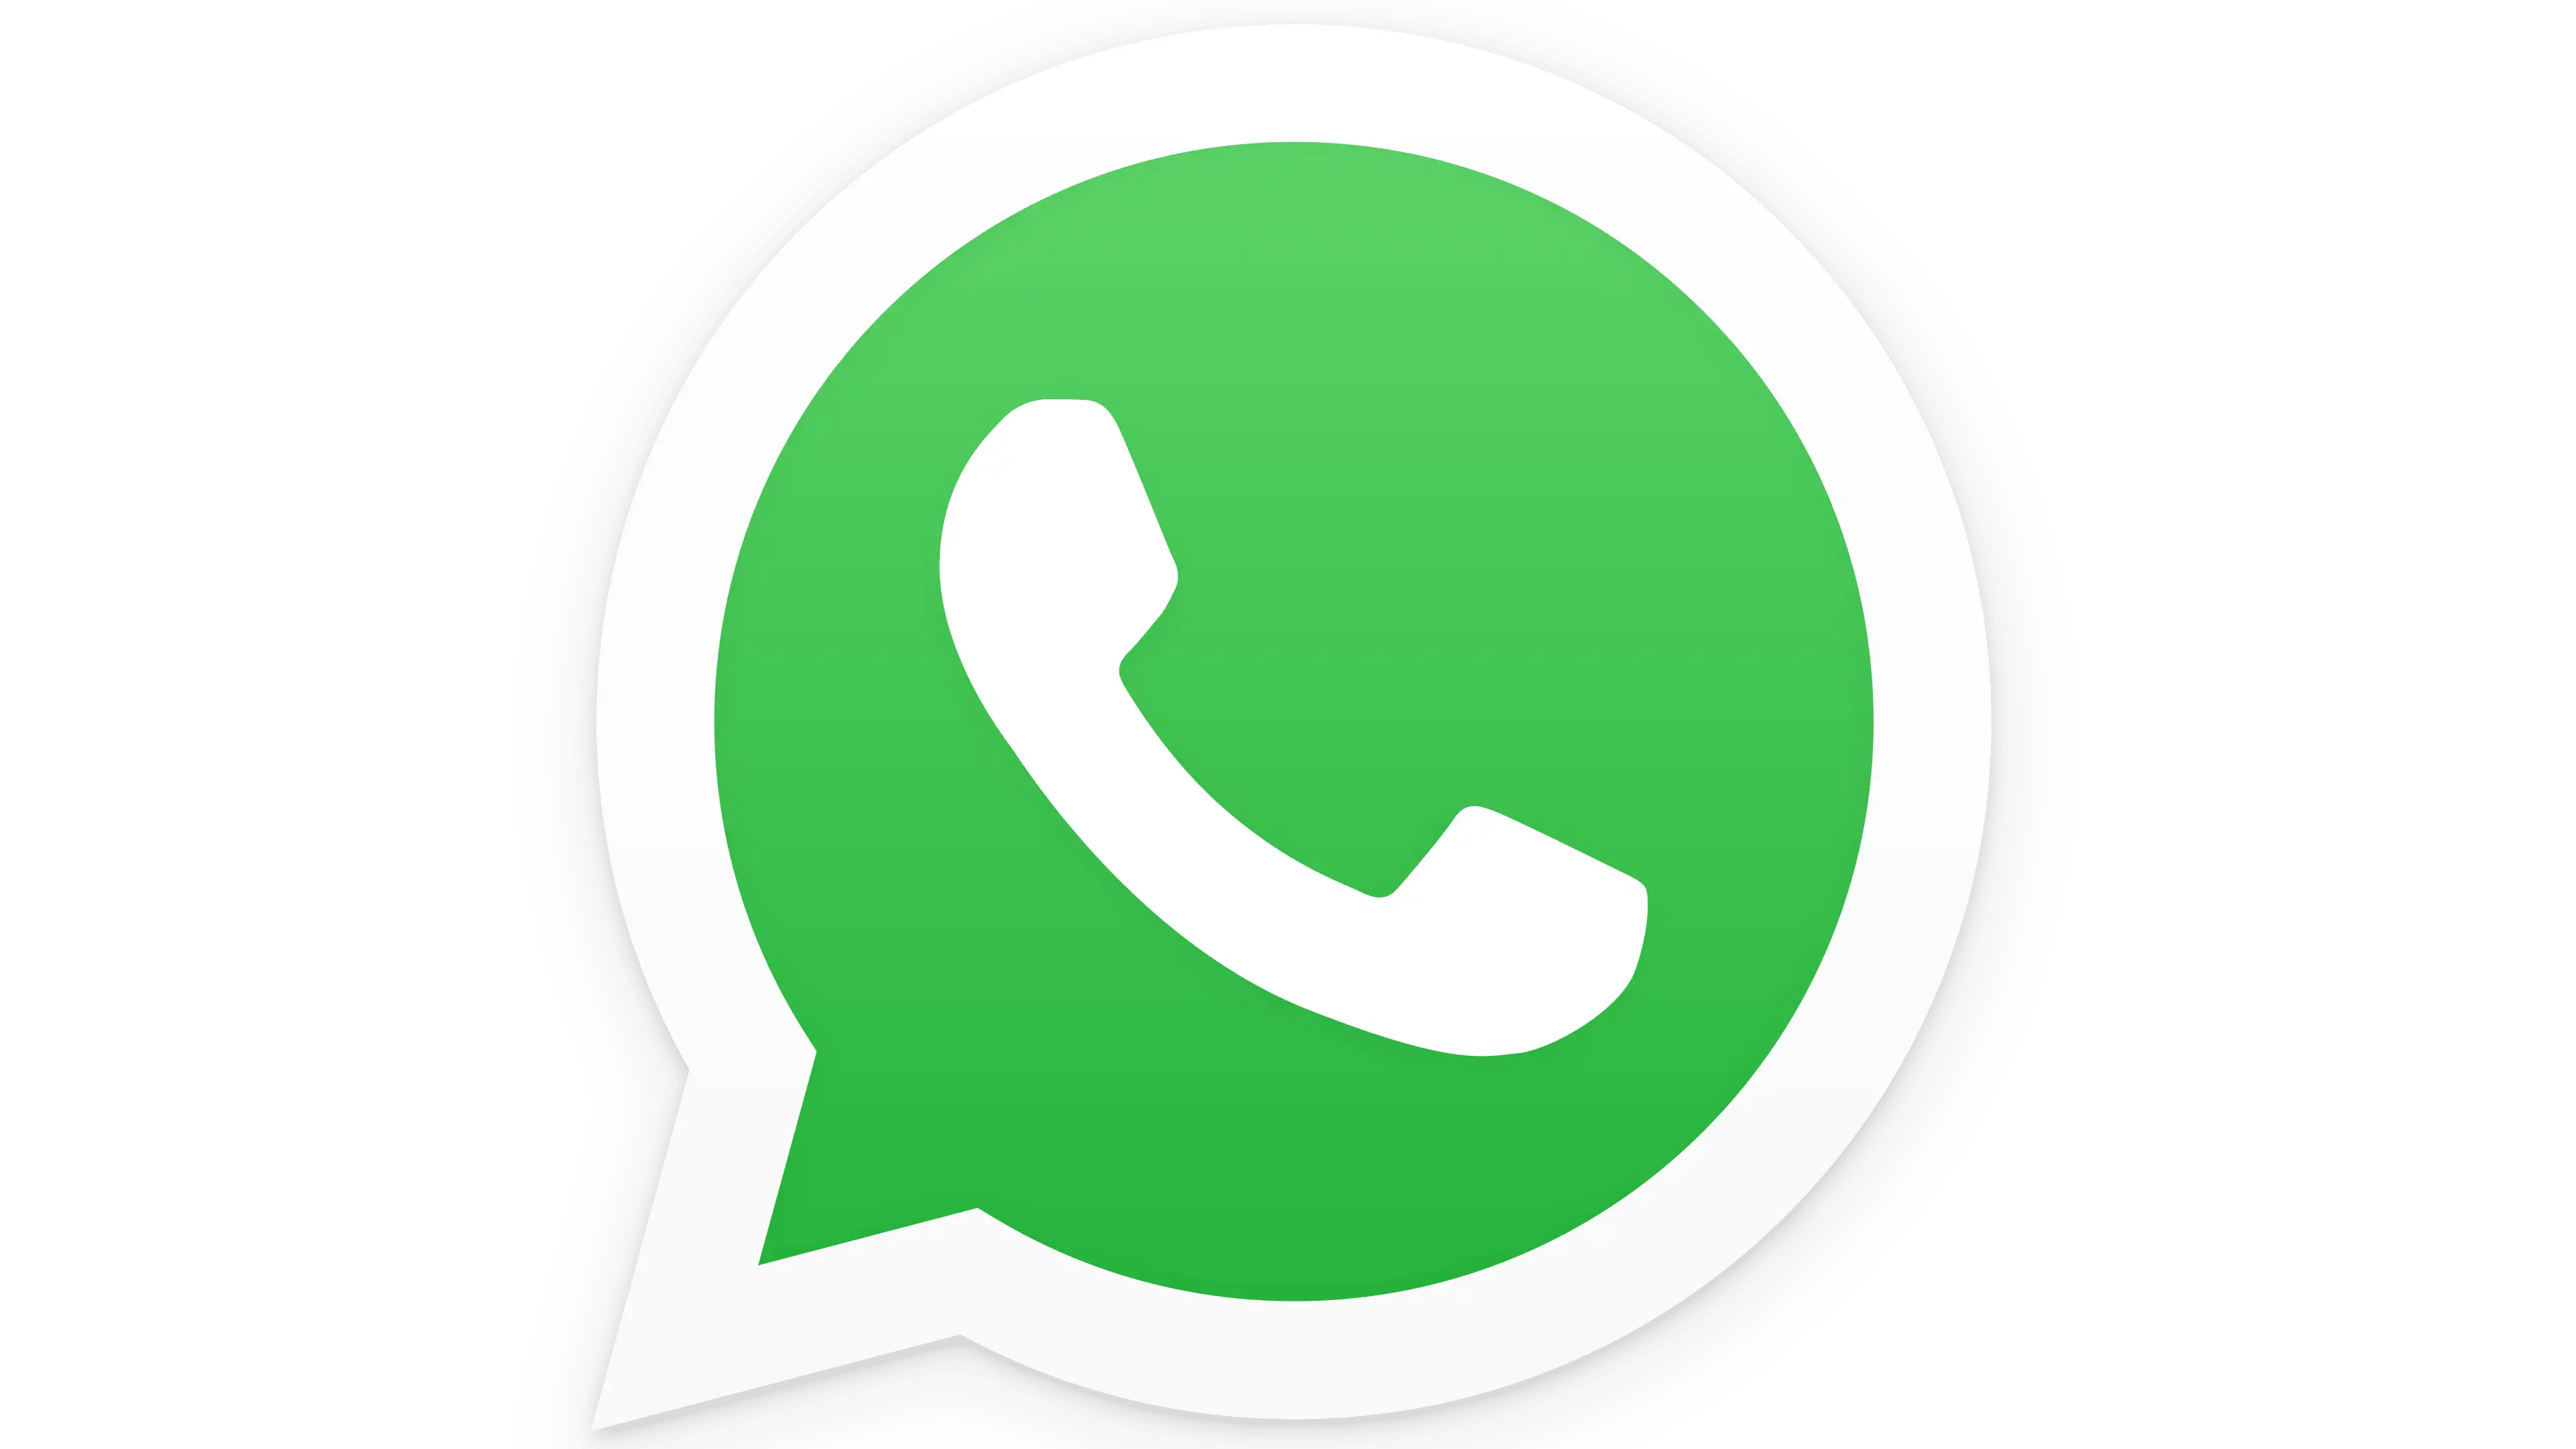 WhatsApp will no longer support iOS 10 and iOS 11 from this date